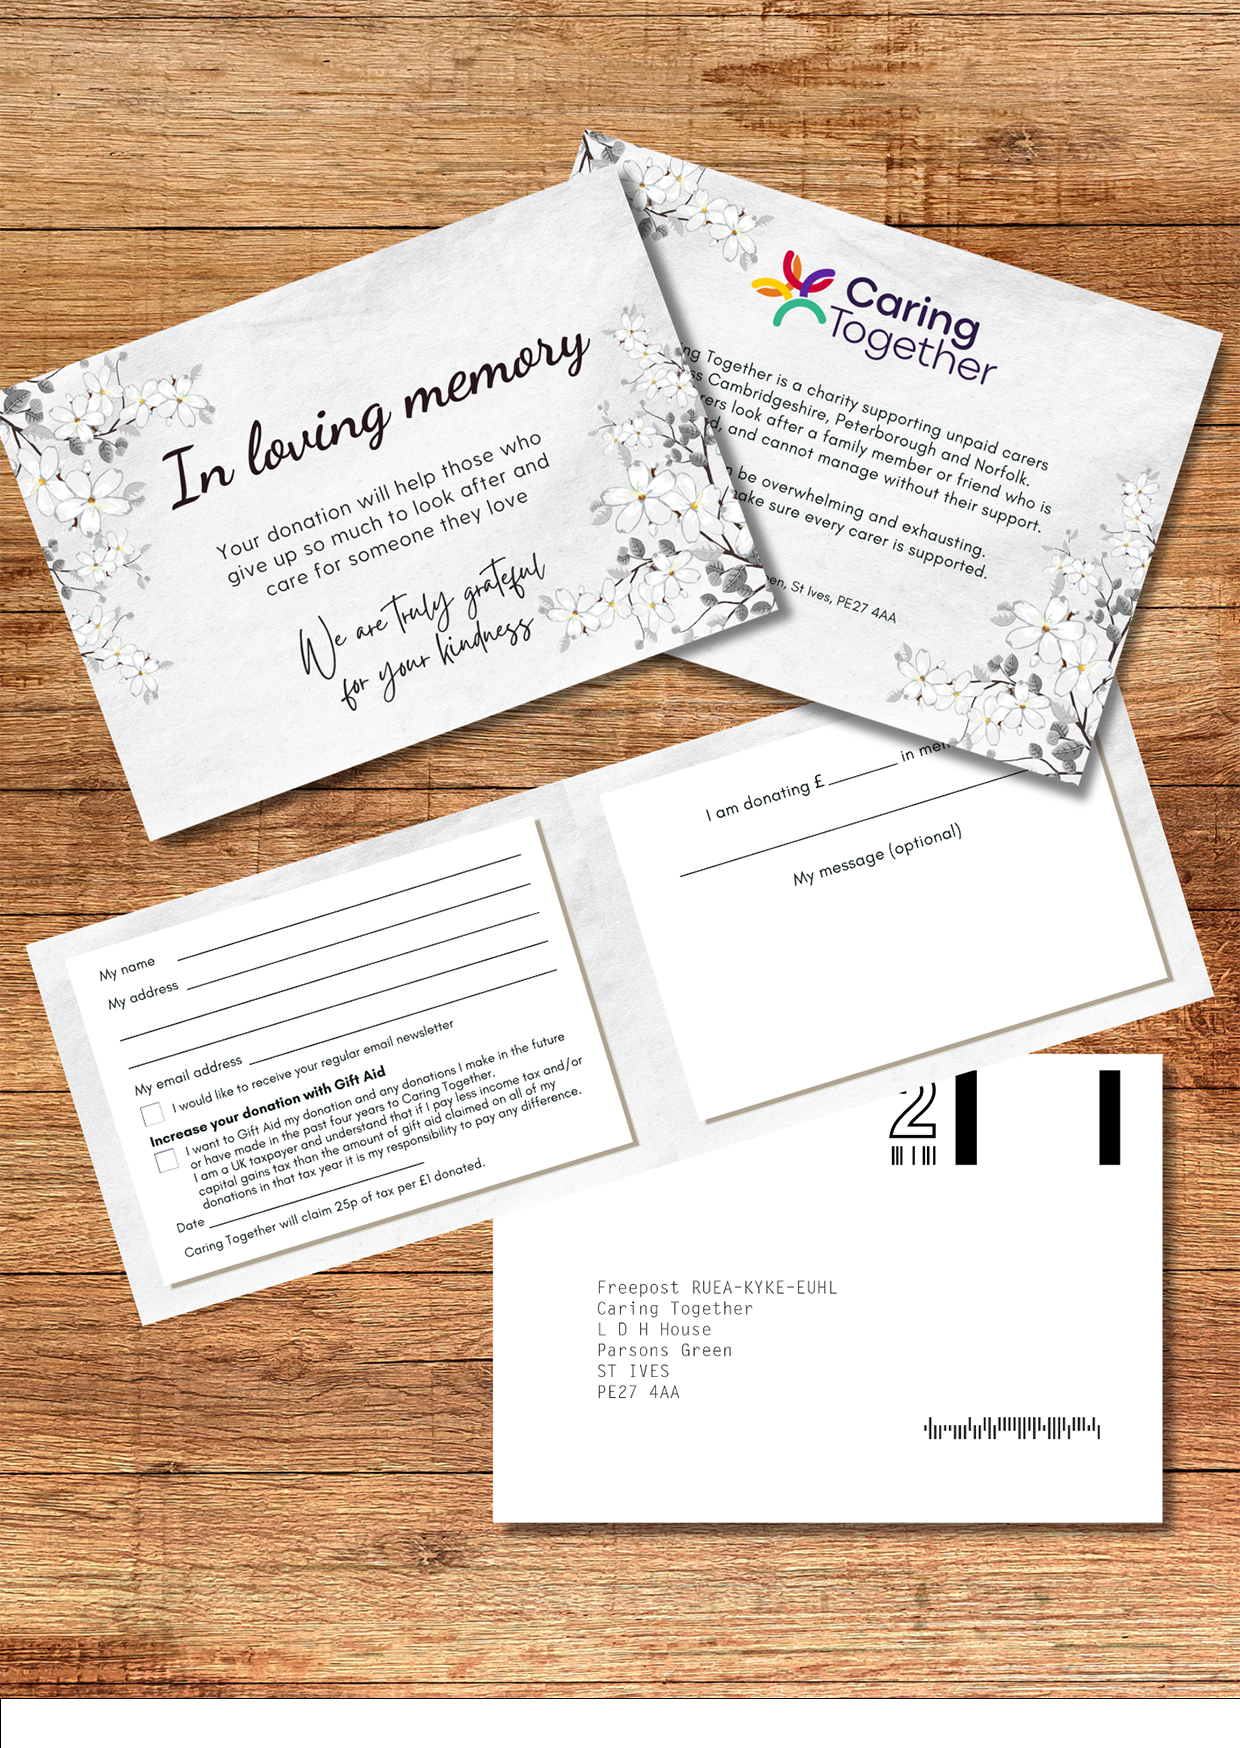 In loving memory donation cards